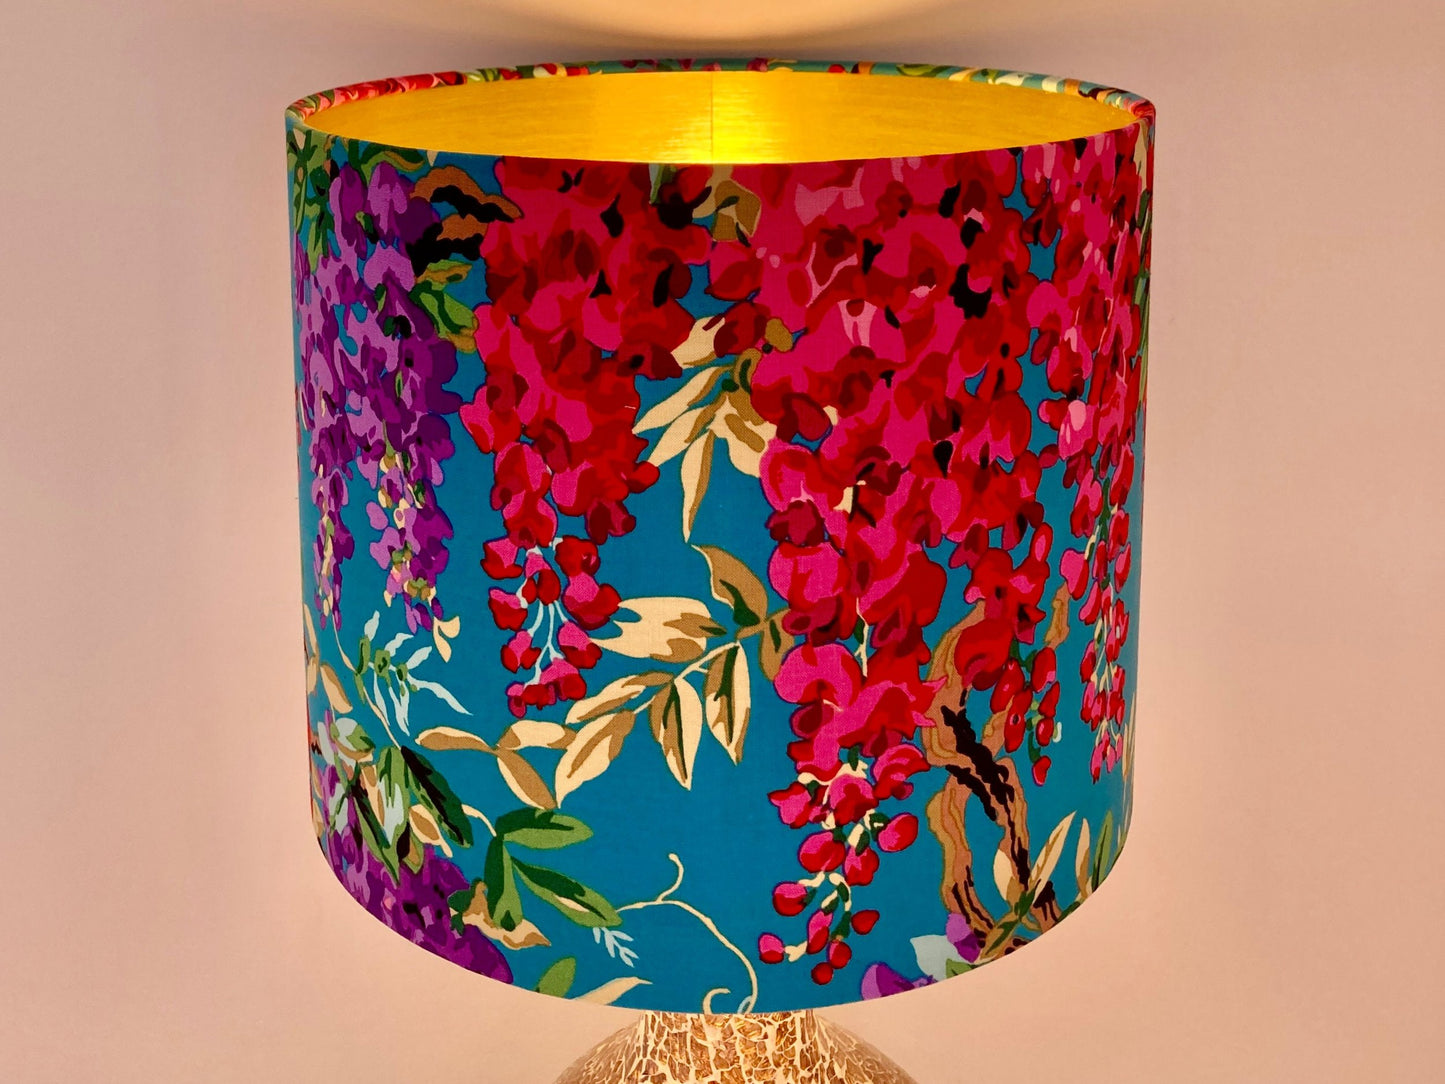 Teal and Pink Wisteria Flower Lampshade, Bright Colourful Kaffe Fassett Drum Lampshade